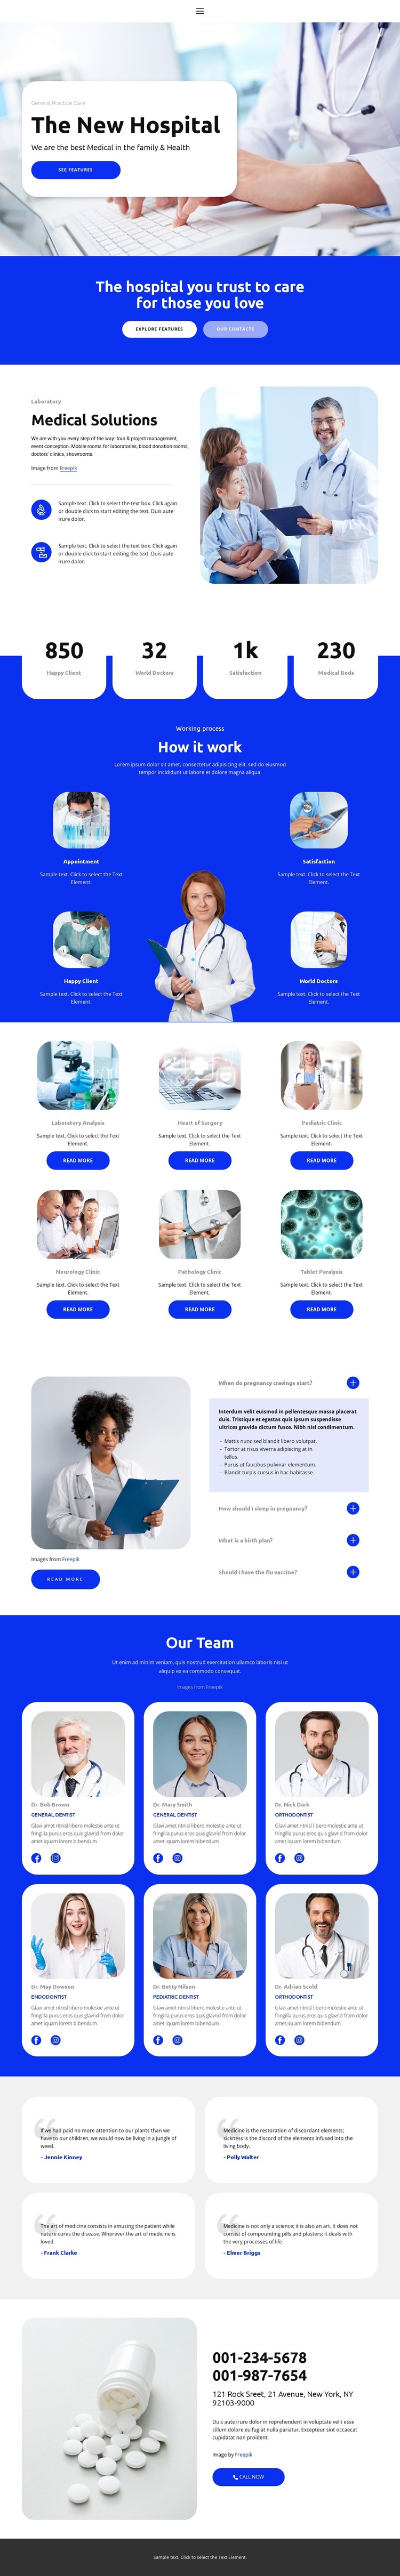 The New Hospital HTML5 Template